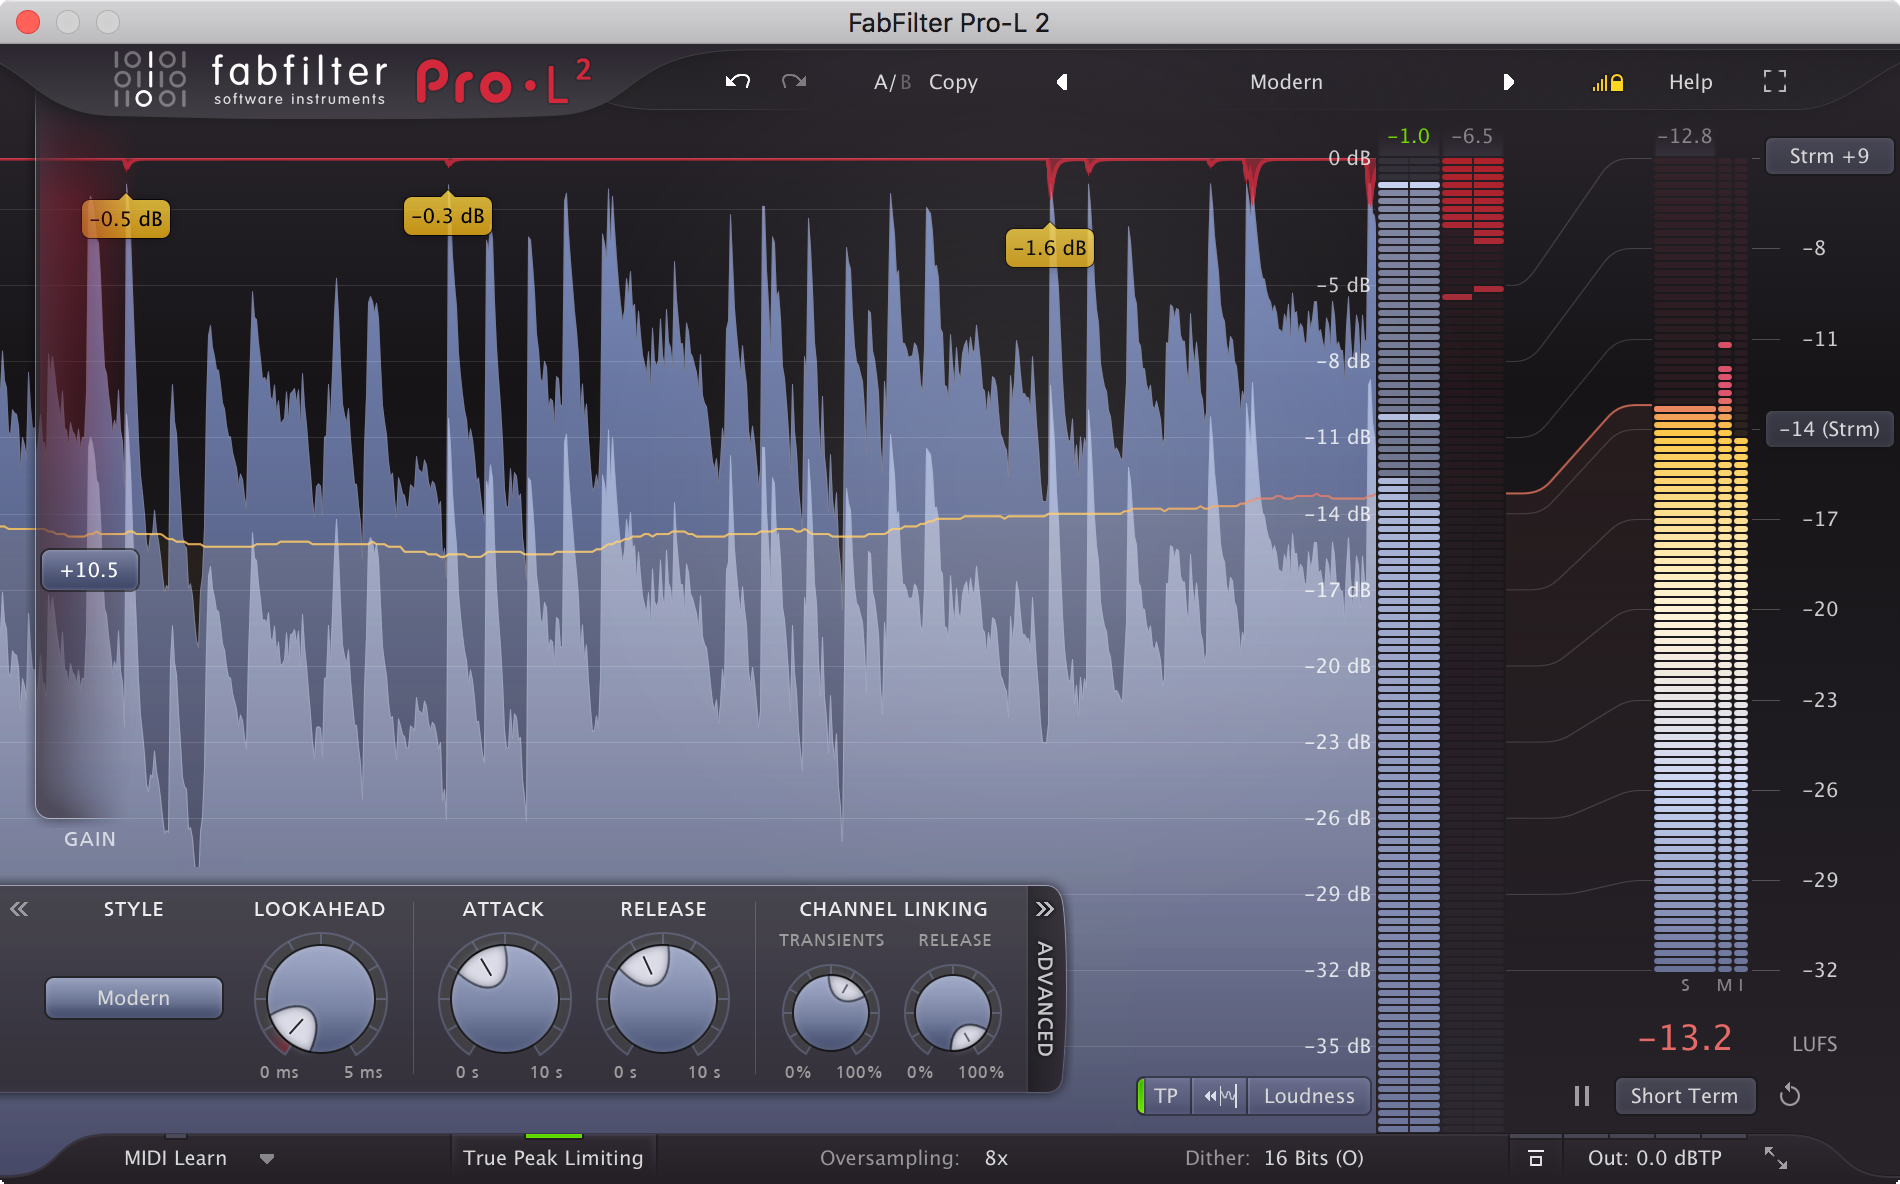 FabFilter Pro-L2, available on Dec, 5th